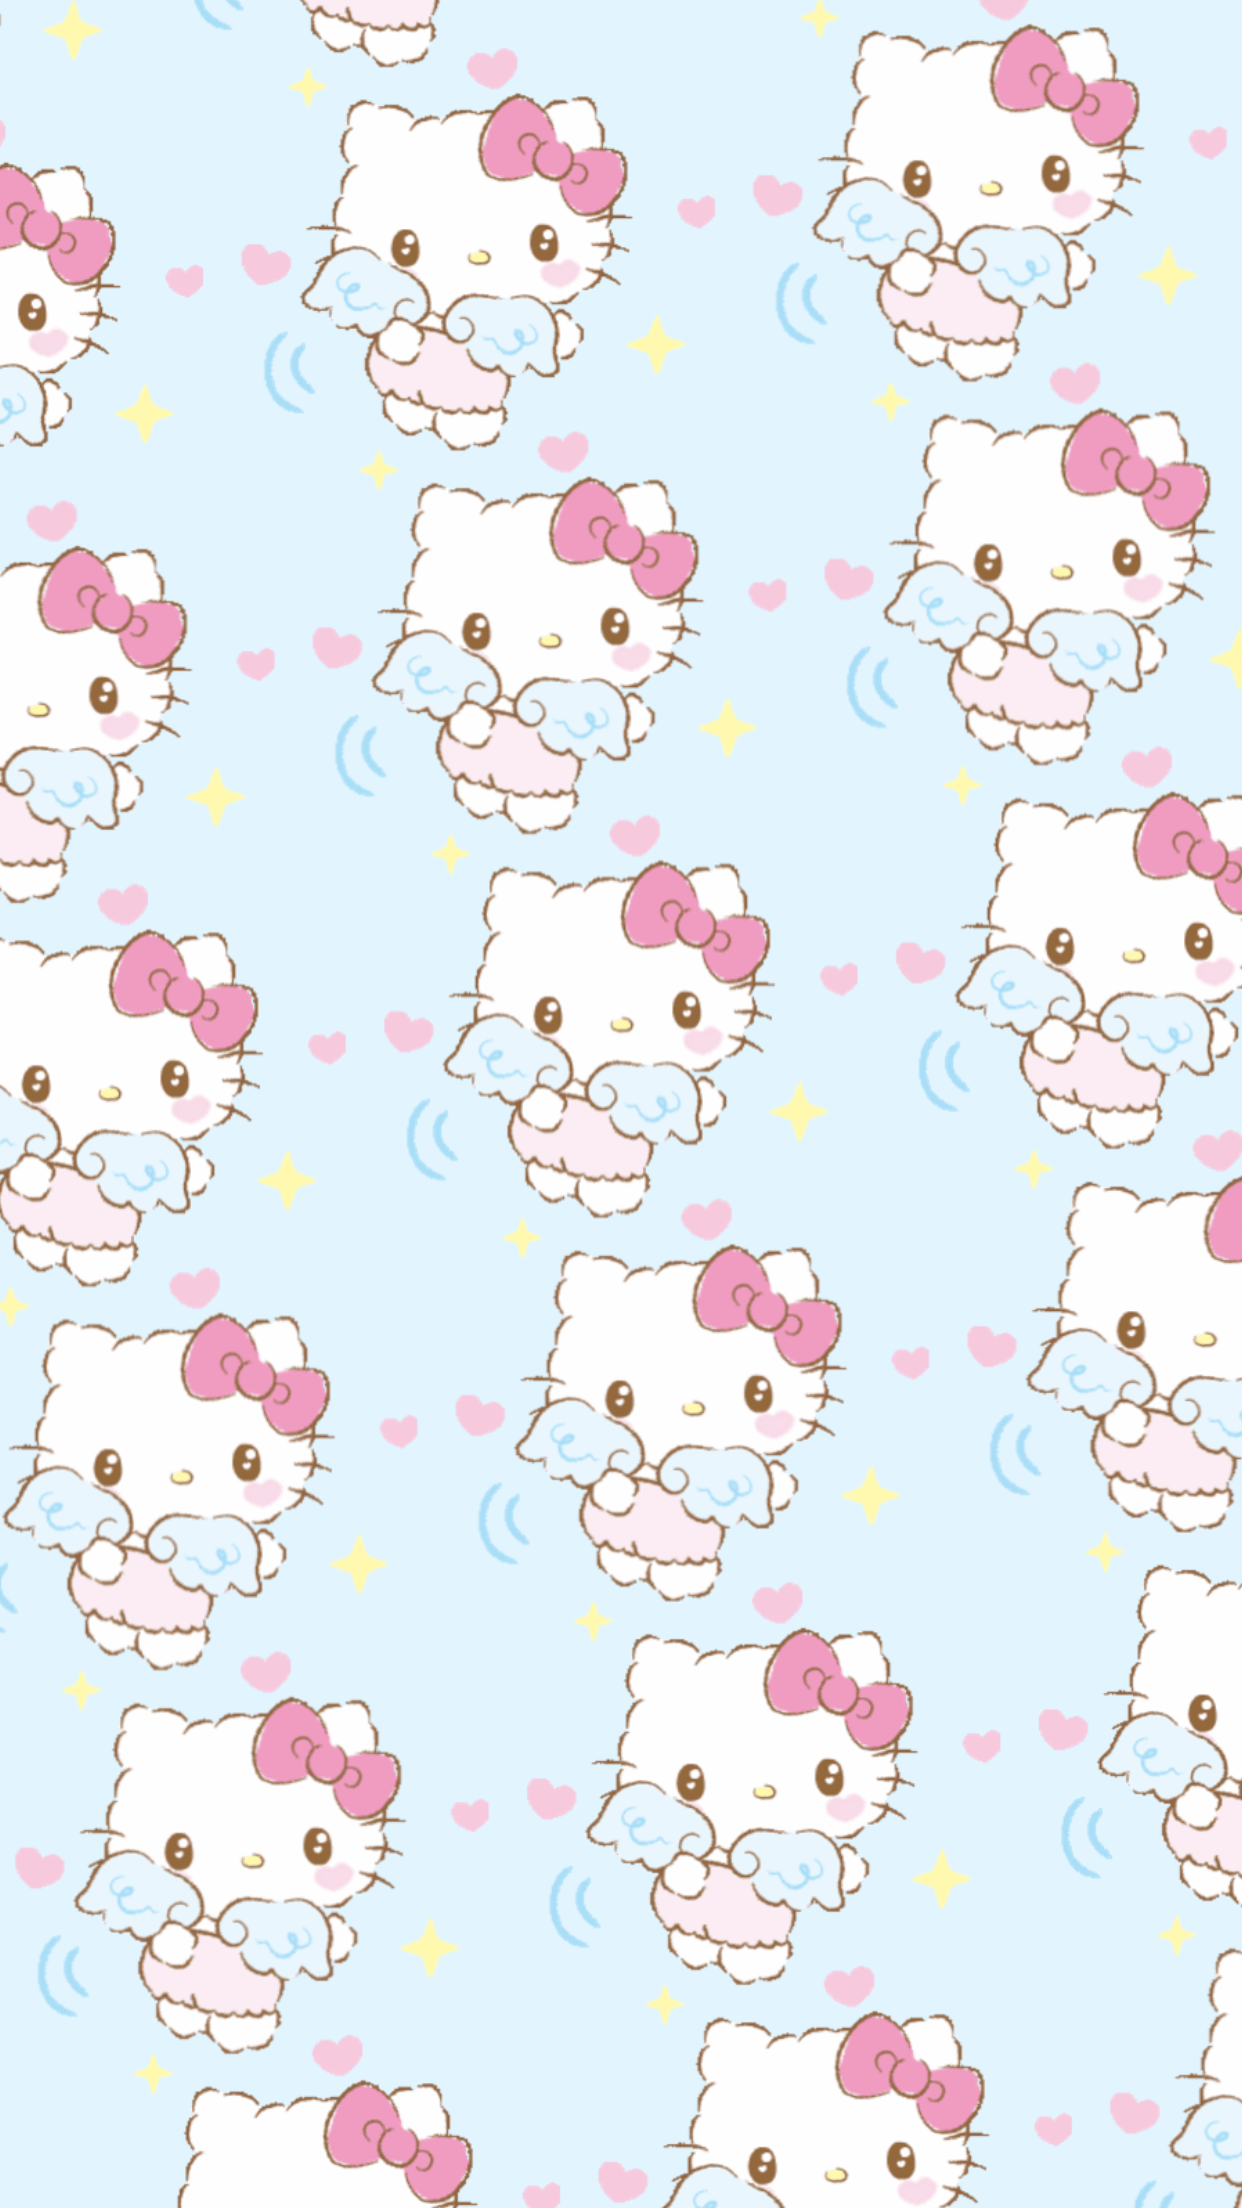 A pattern of hello kitty in the water - Hello Kitty